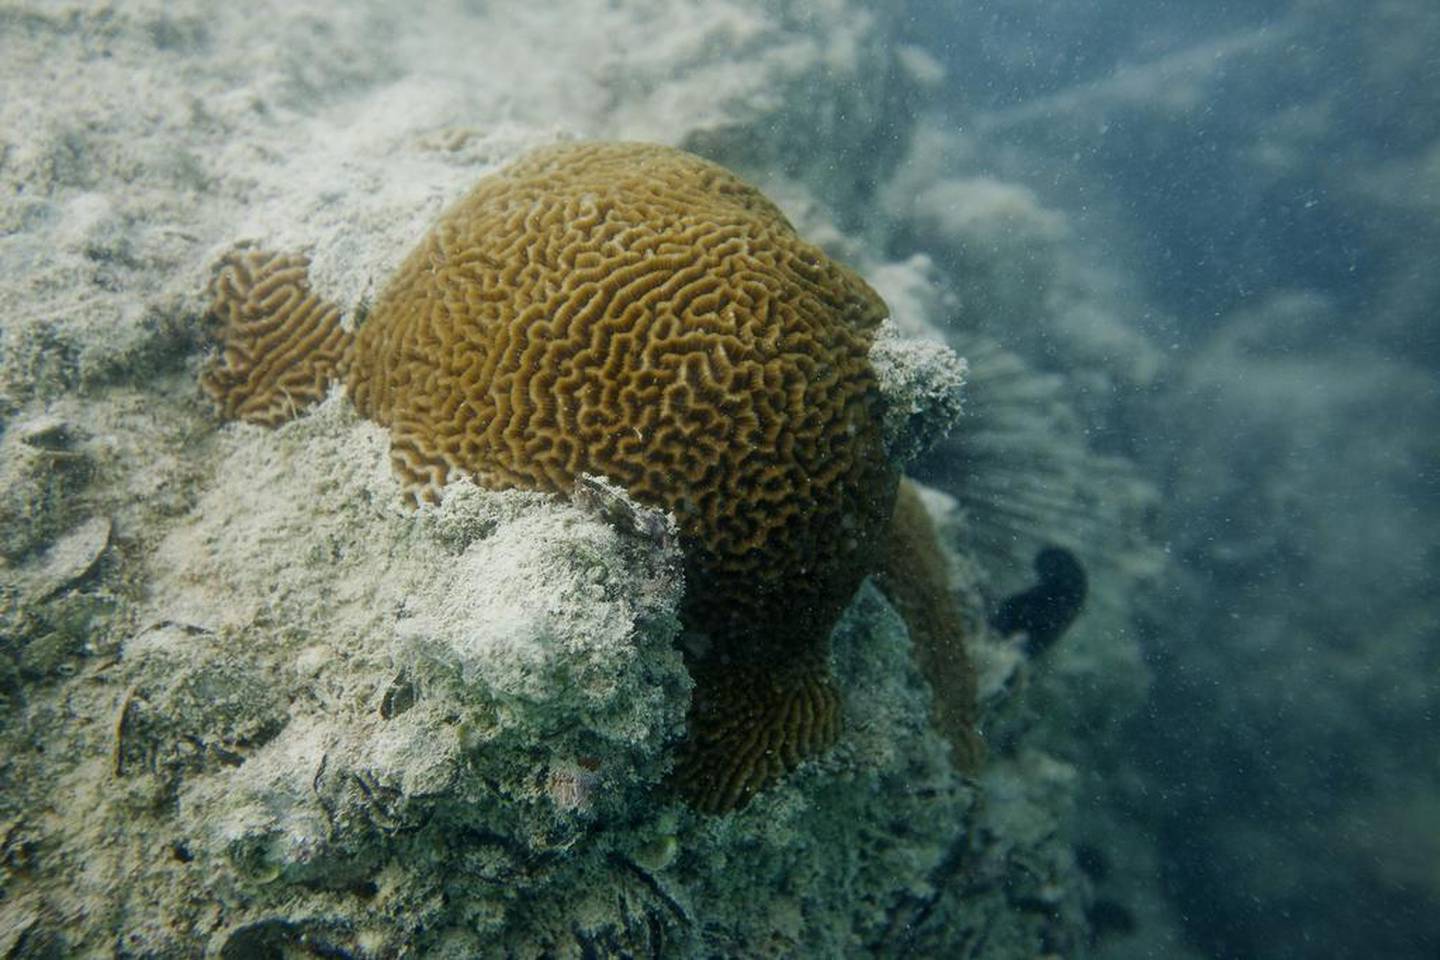 A brain coral off the breakwater near Marina Mall in Abu Dhabi. Corals are vital for the marine ecosystem. Antonie Robertson / The National